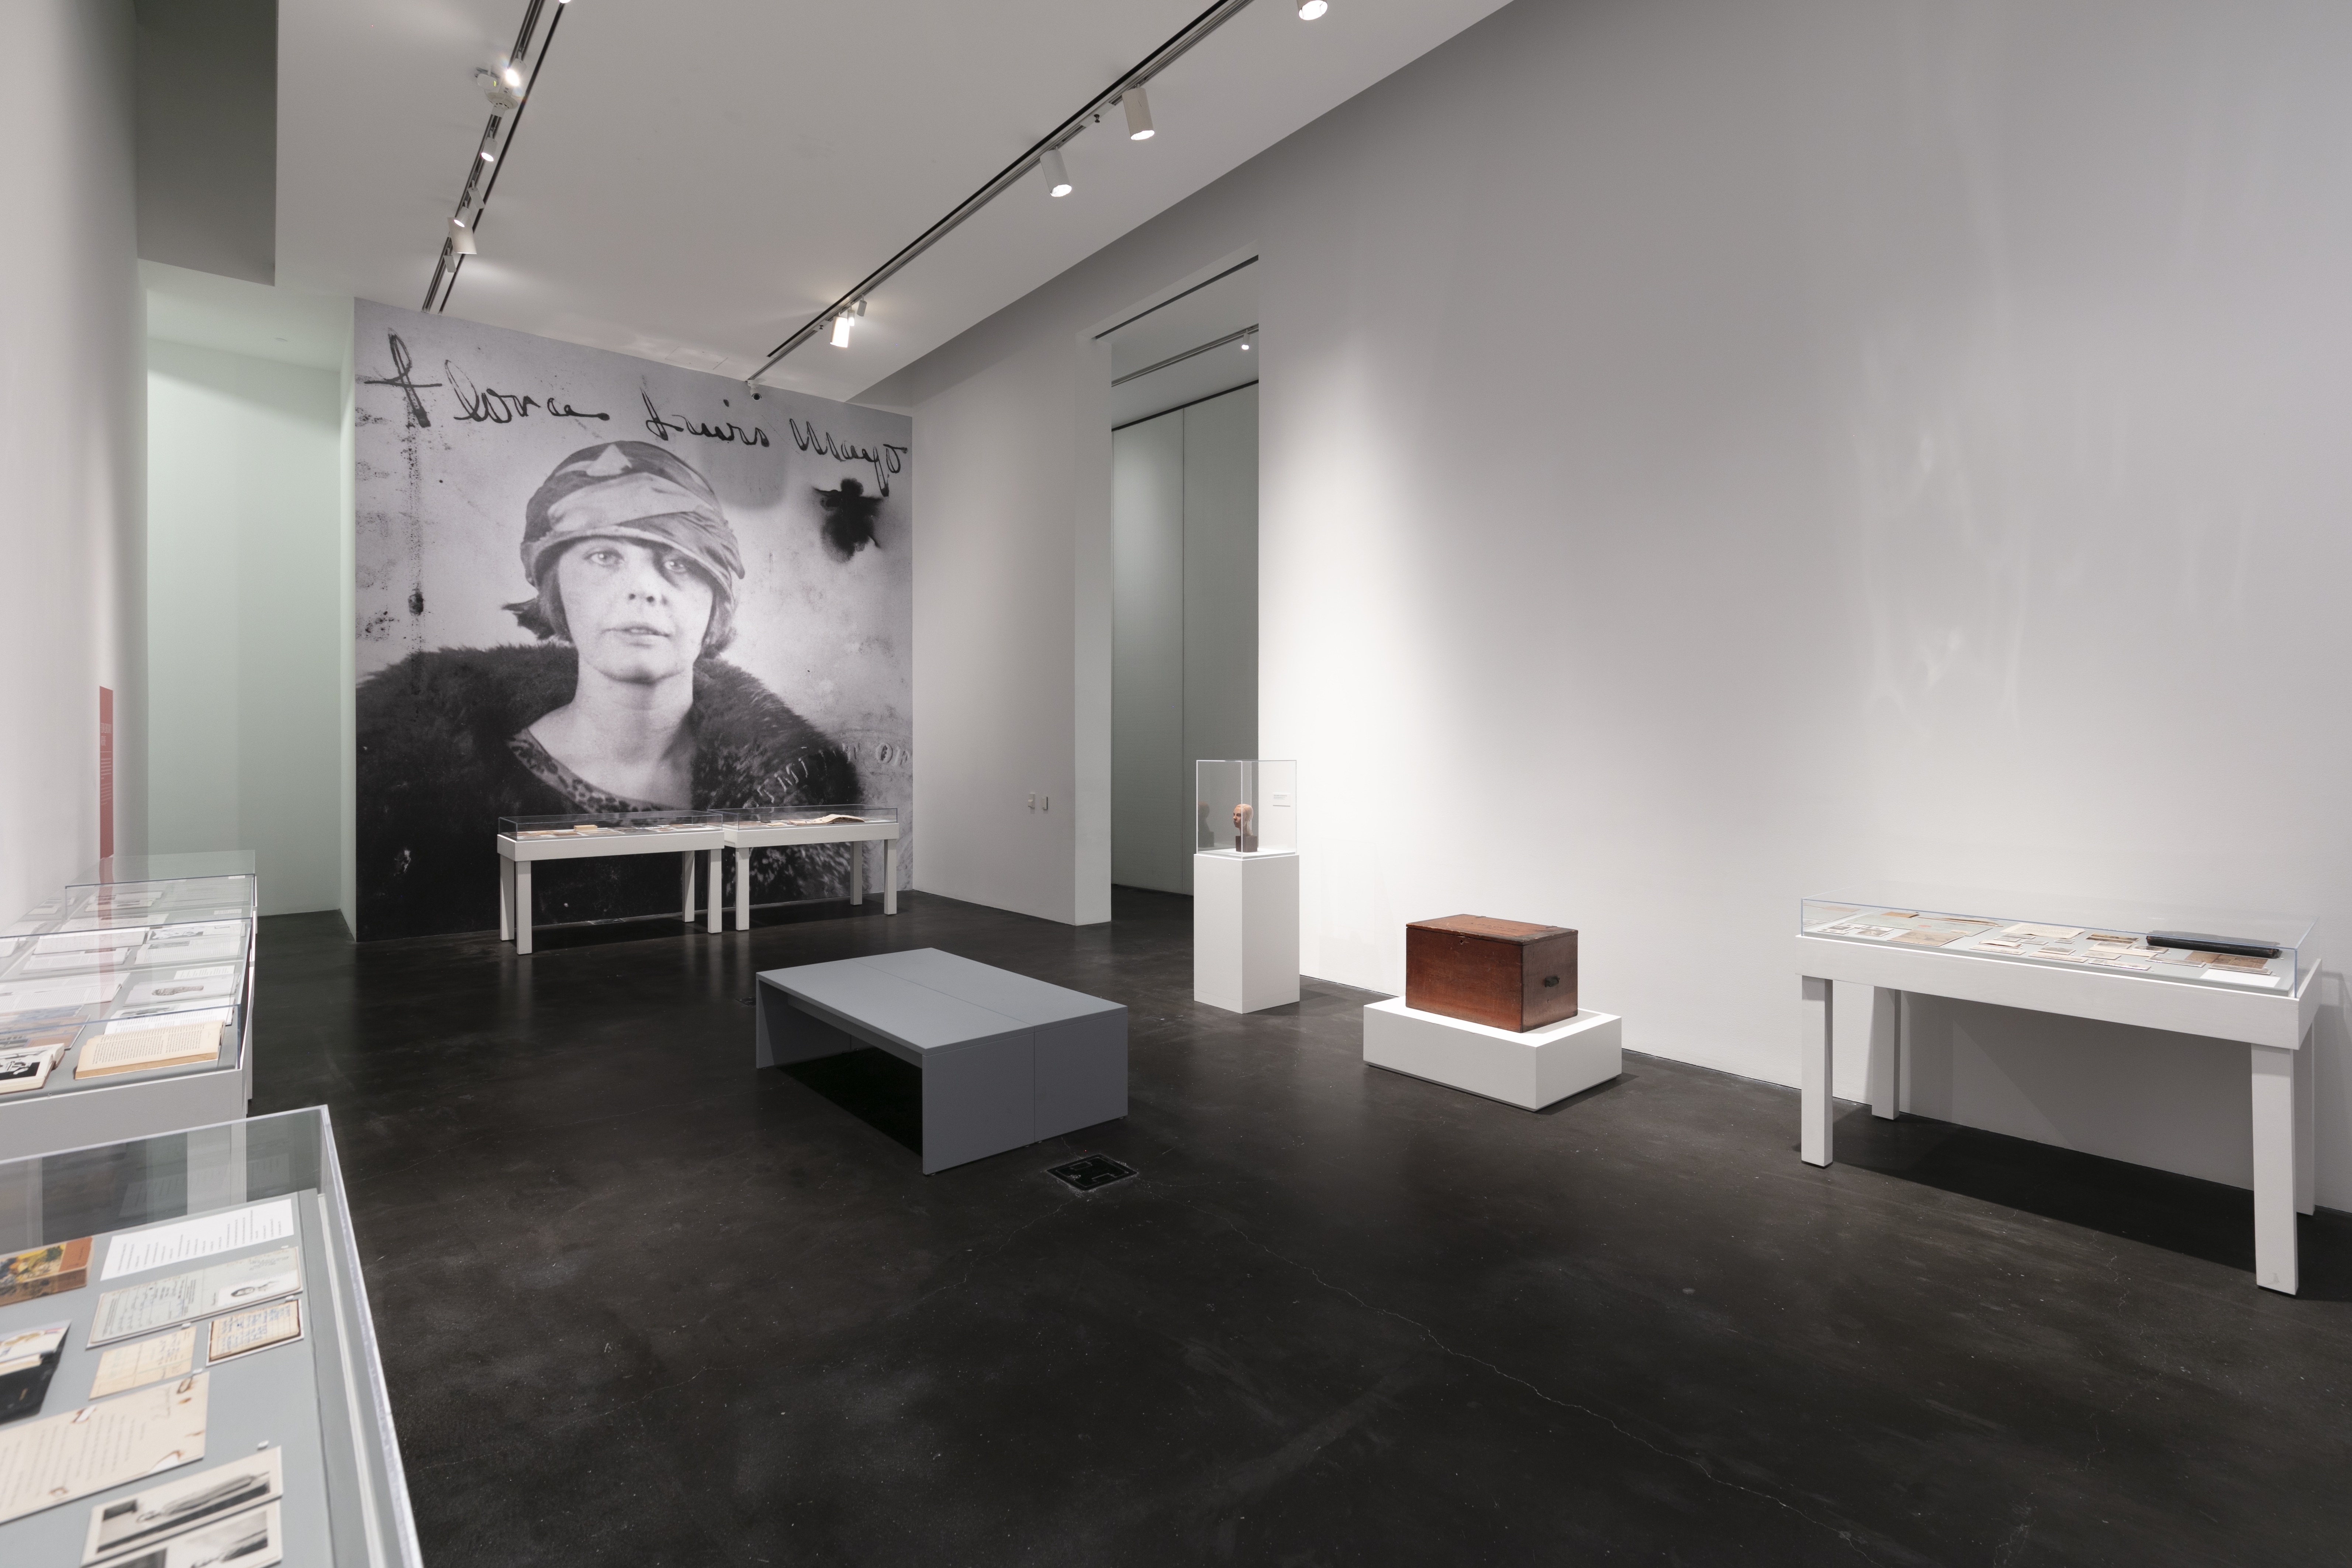 Shot of a gallery space containing several white tables displaying archival materials. The far wall displays a black and white portrait of Flora Mayo. She is wearing a wrap and a fur coat. 